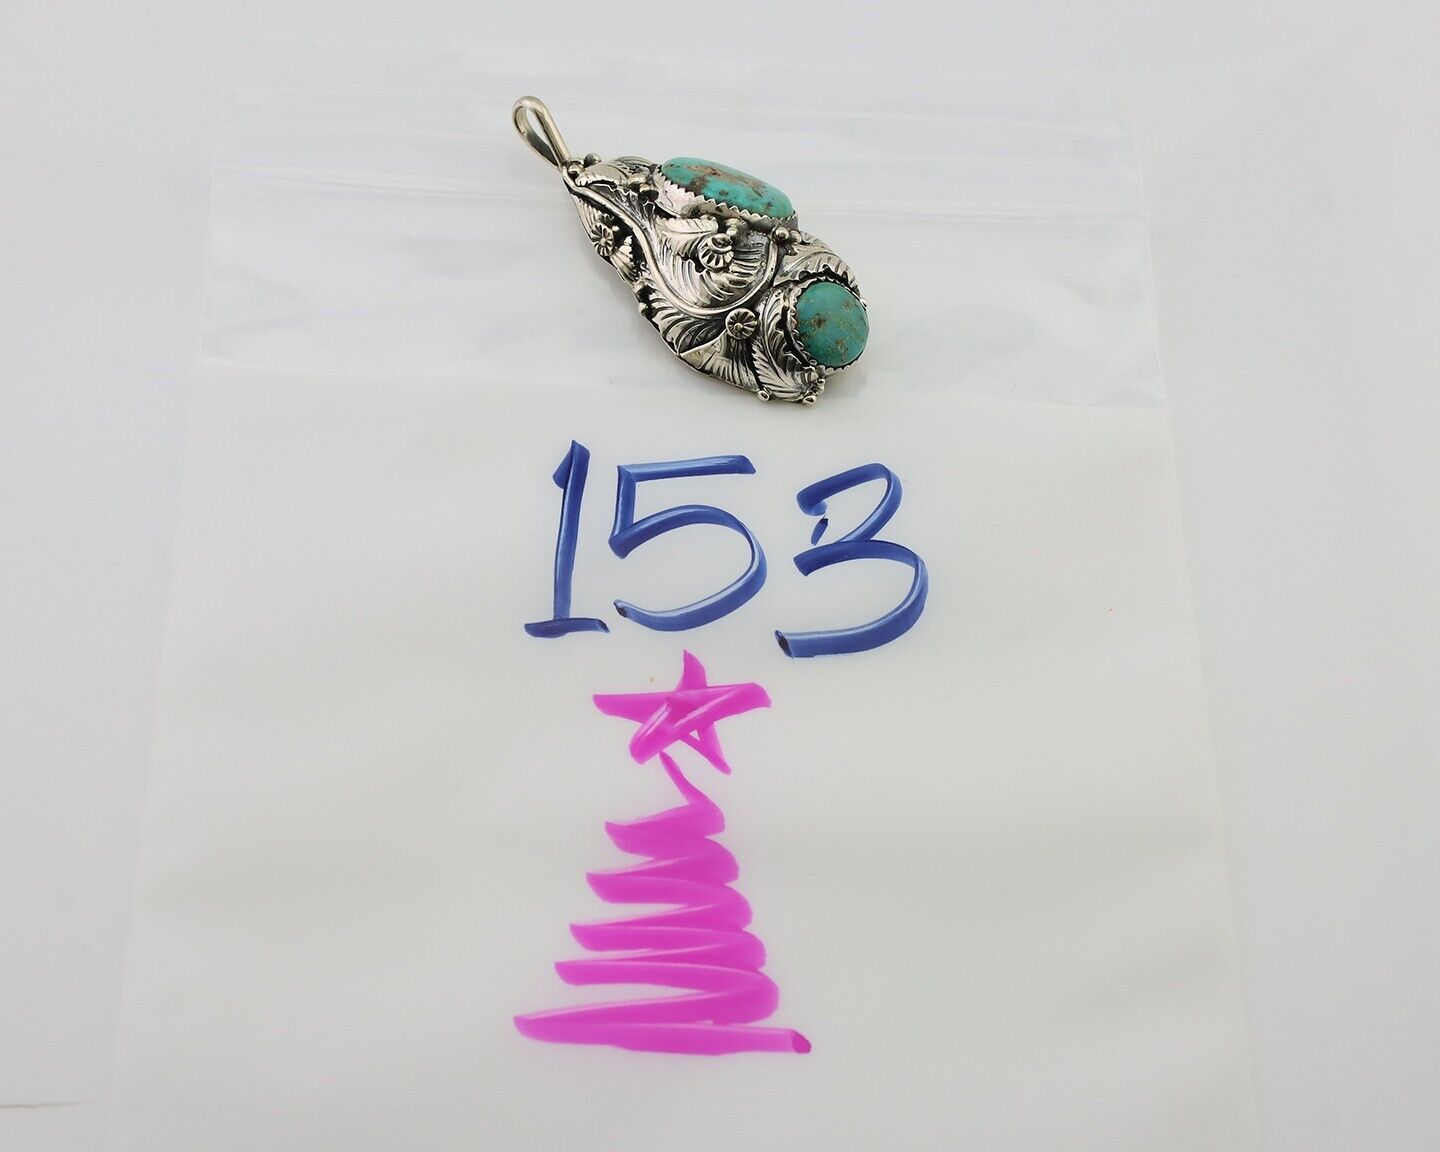 Navajo Pendant 925 Silver Natural Bisbee Turquoise Signed Tom Willeto C.80's